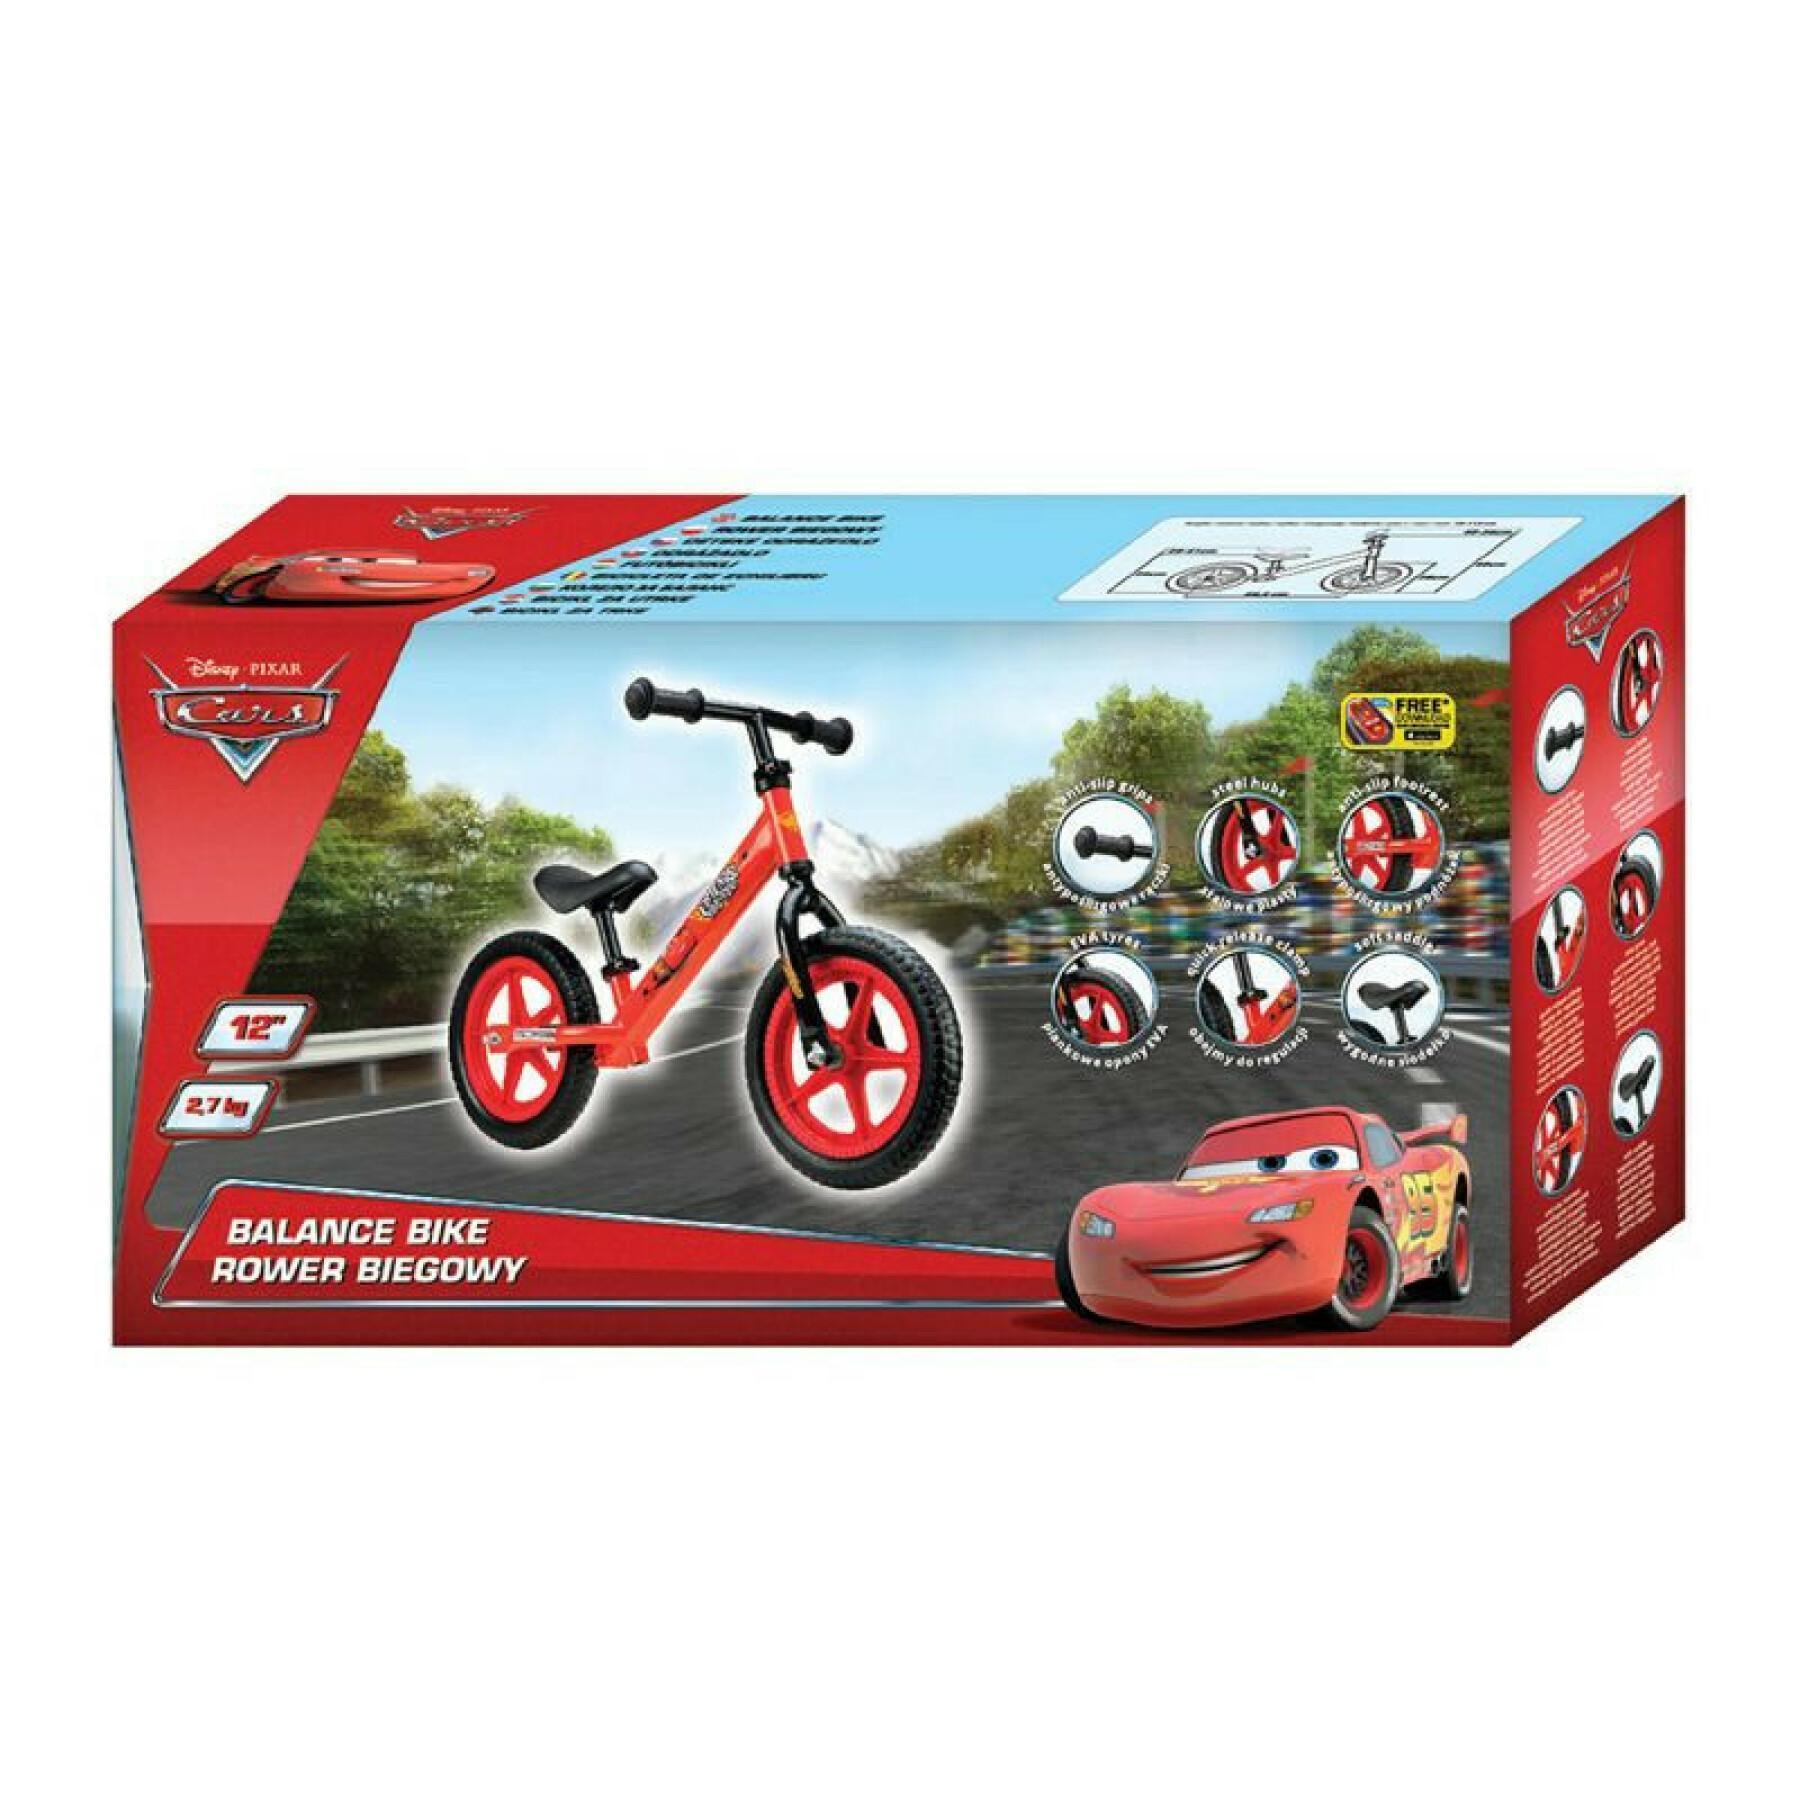 Metal scooter for children Disney cars